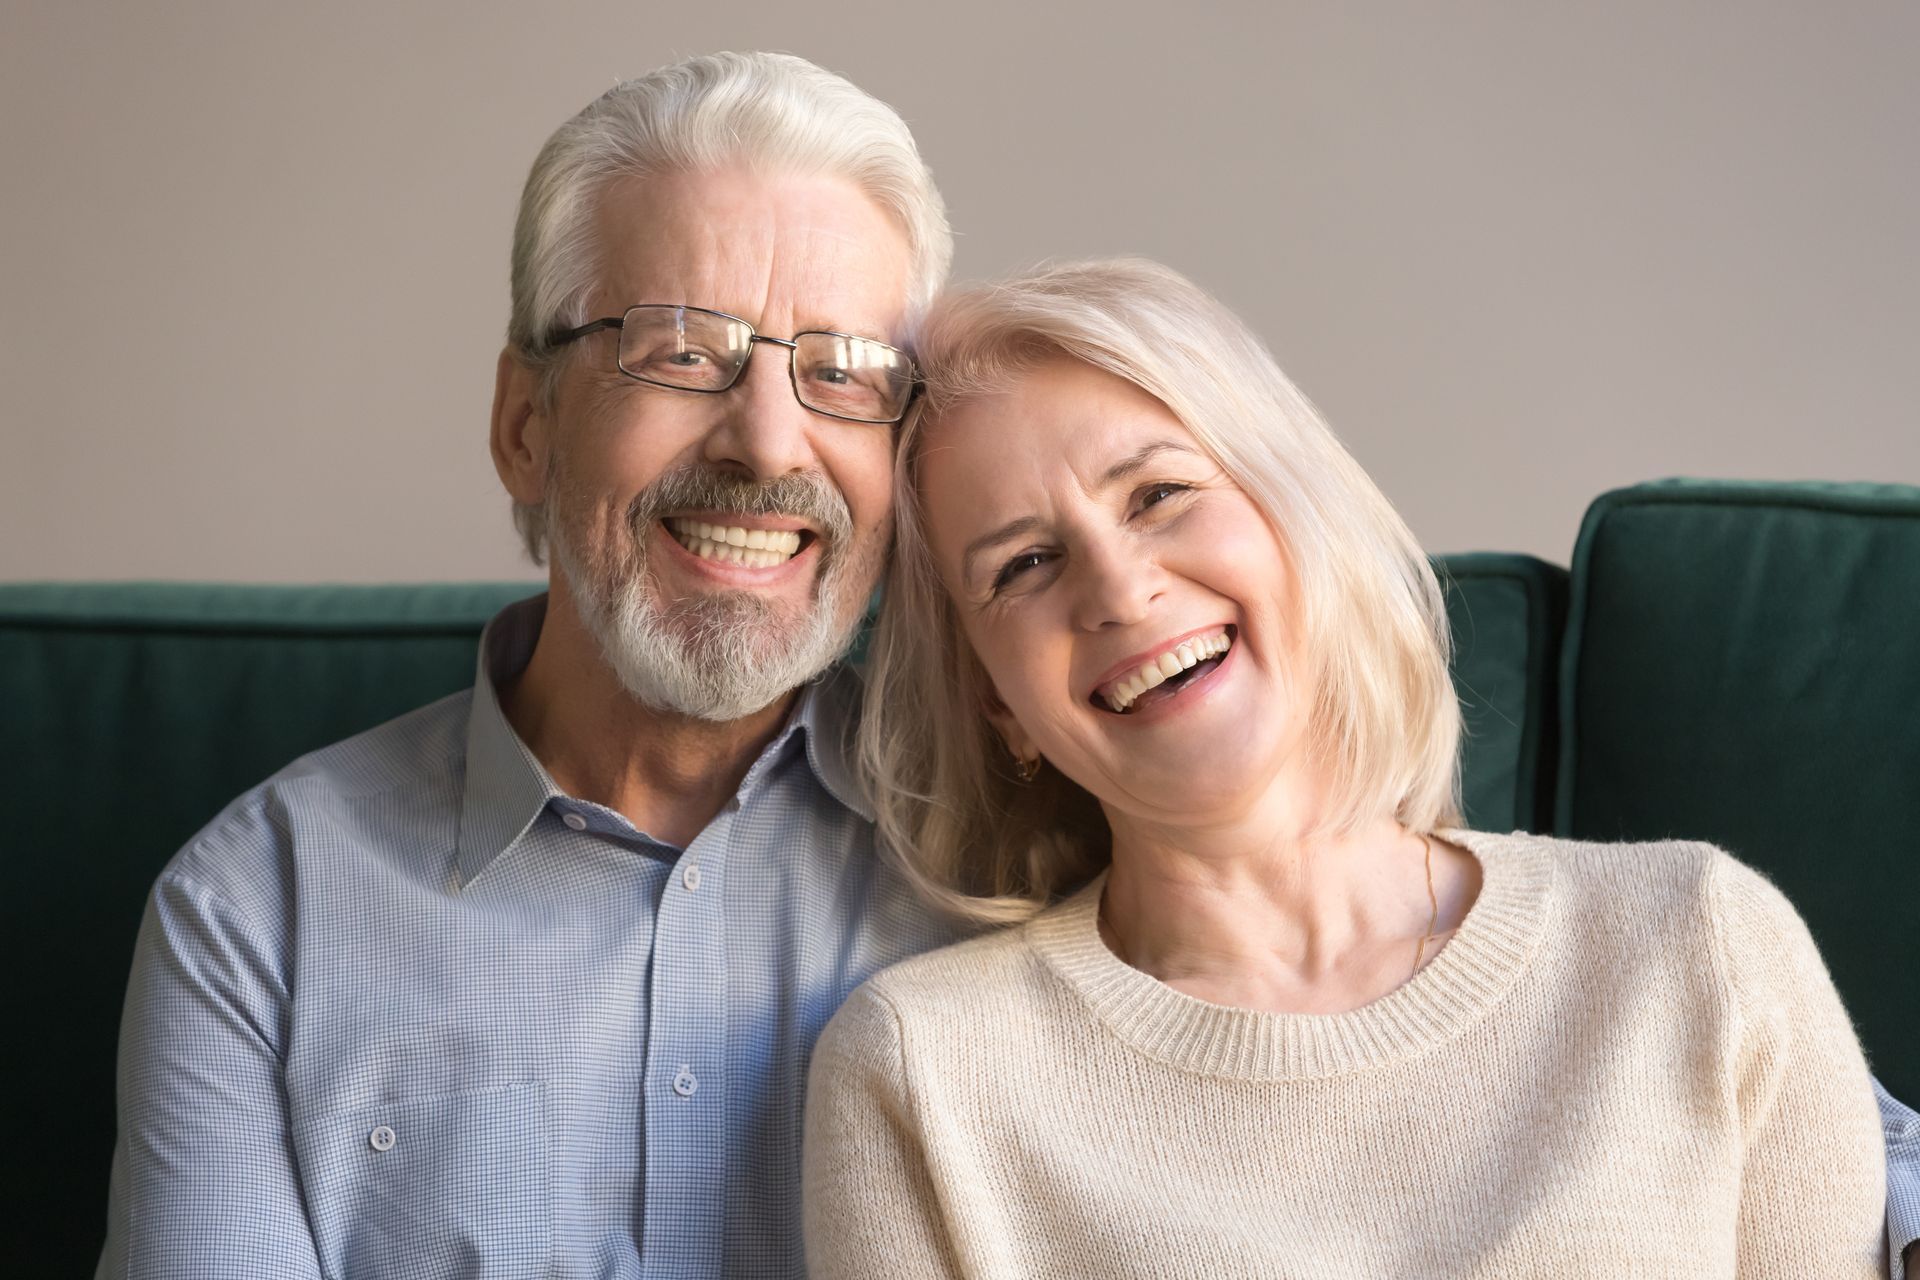 an elderly couple is sitting on a couch and smiling for the camera.